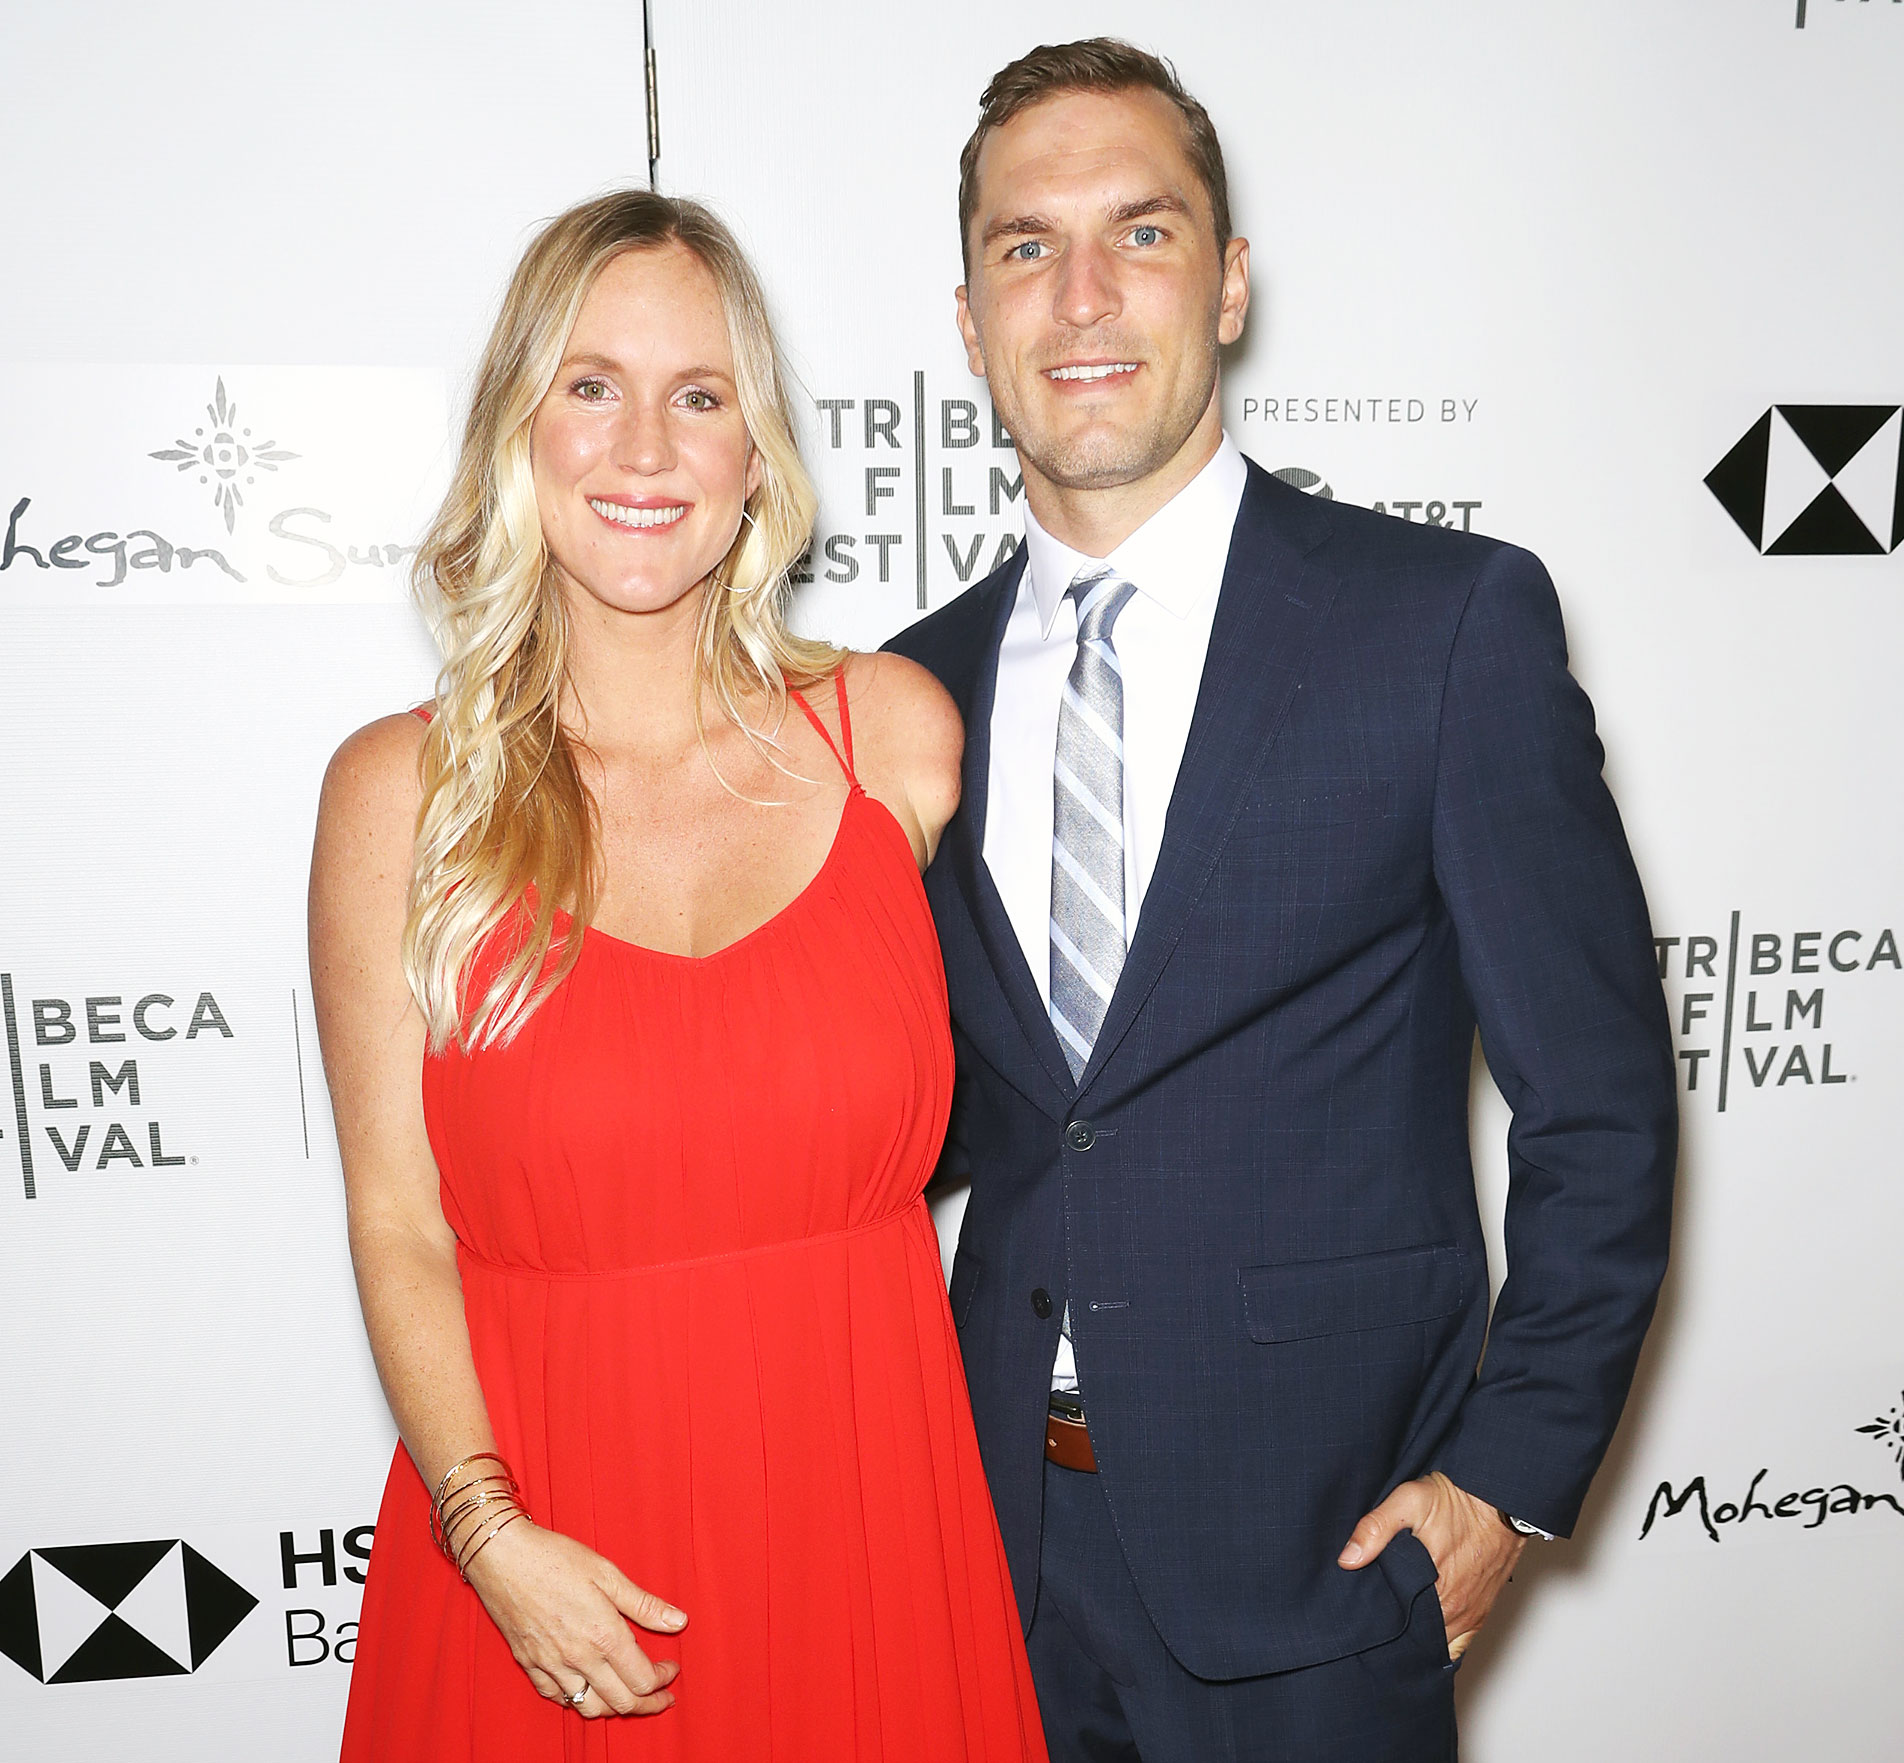 Bethany Hamilton Welcomes 3rd Child With Husband Adam Dirks pic